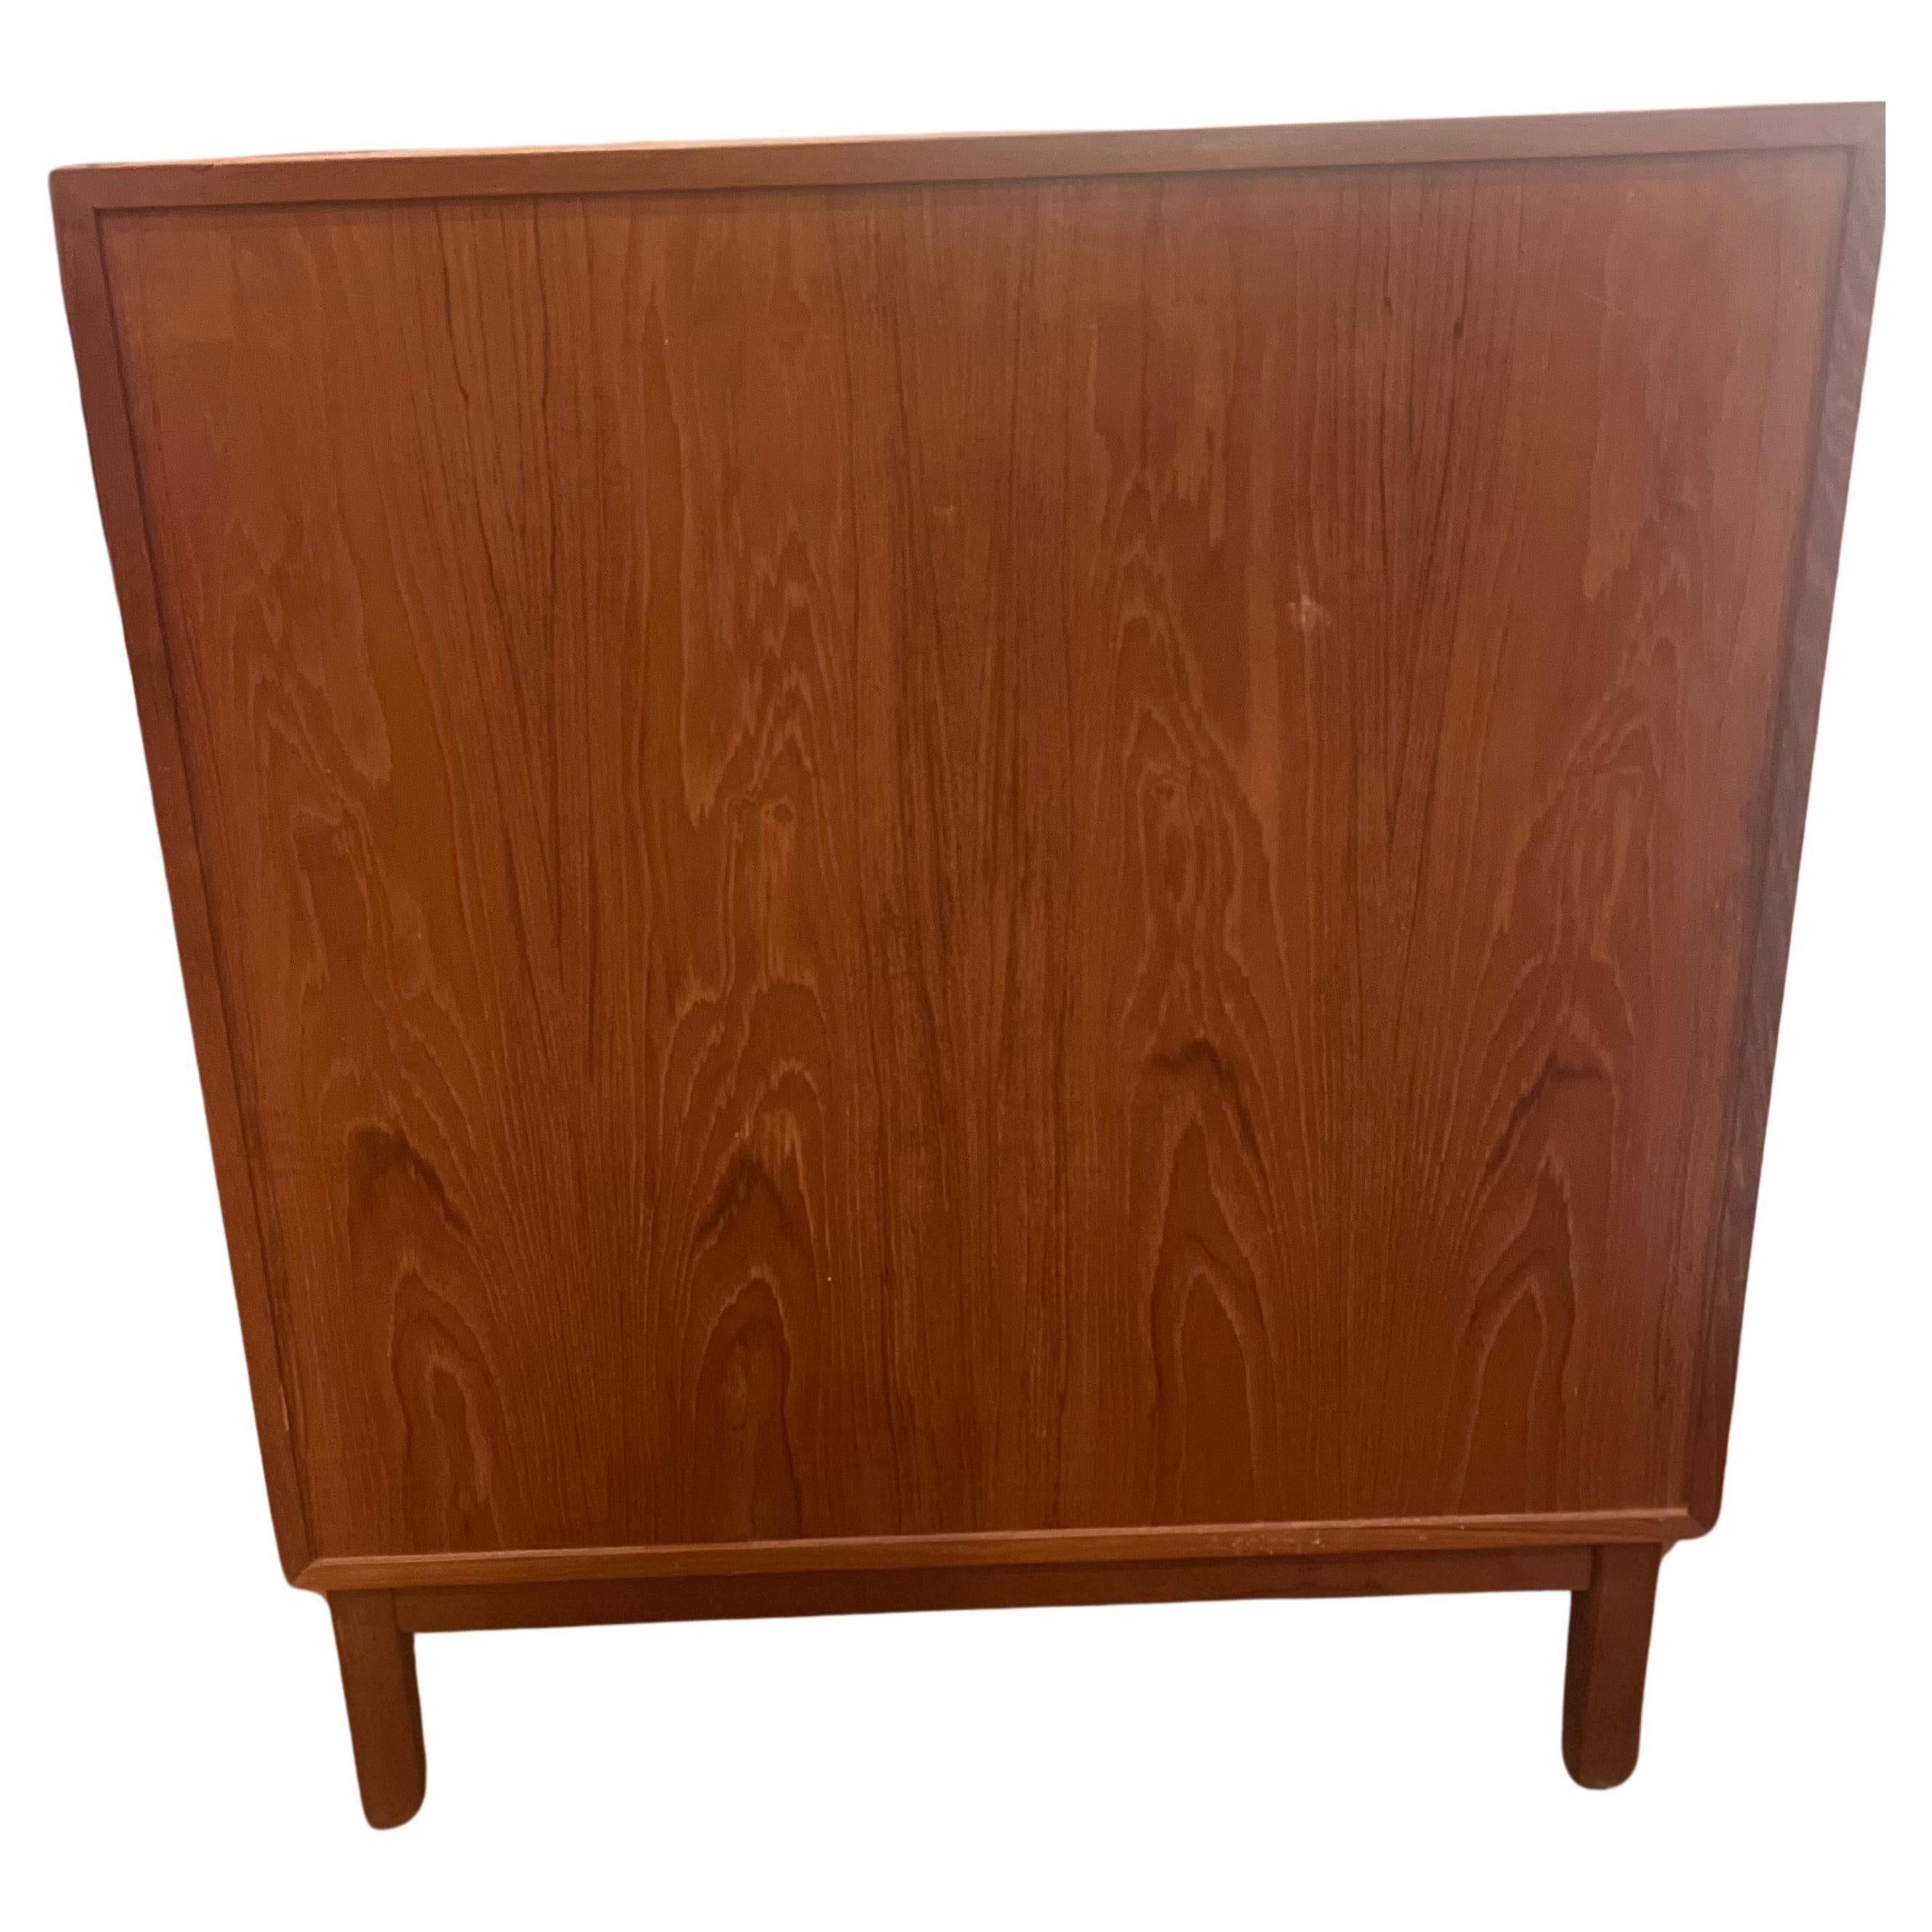 Beautiful elegant six drawer Danish Teak tall chest of drawers, circa 1950's freshly refinished dovetail drawers nice clean condition beautiful enlonged handles elegant , nice solid sturdy piece.